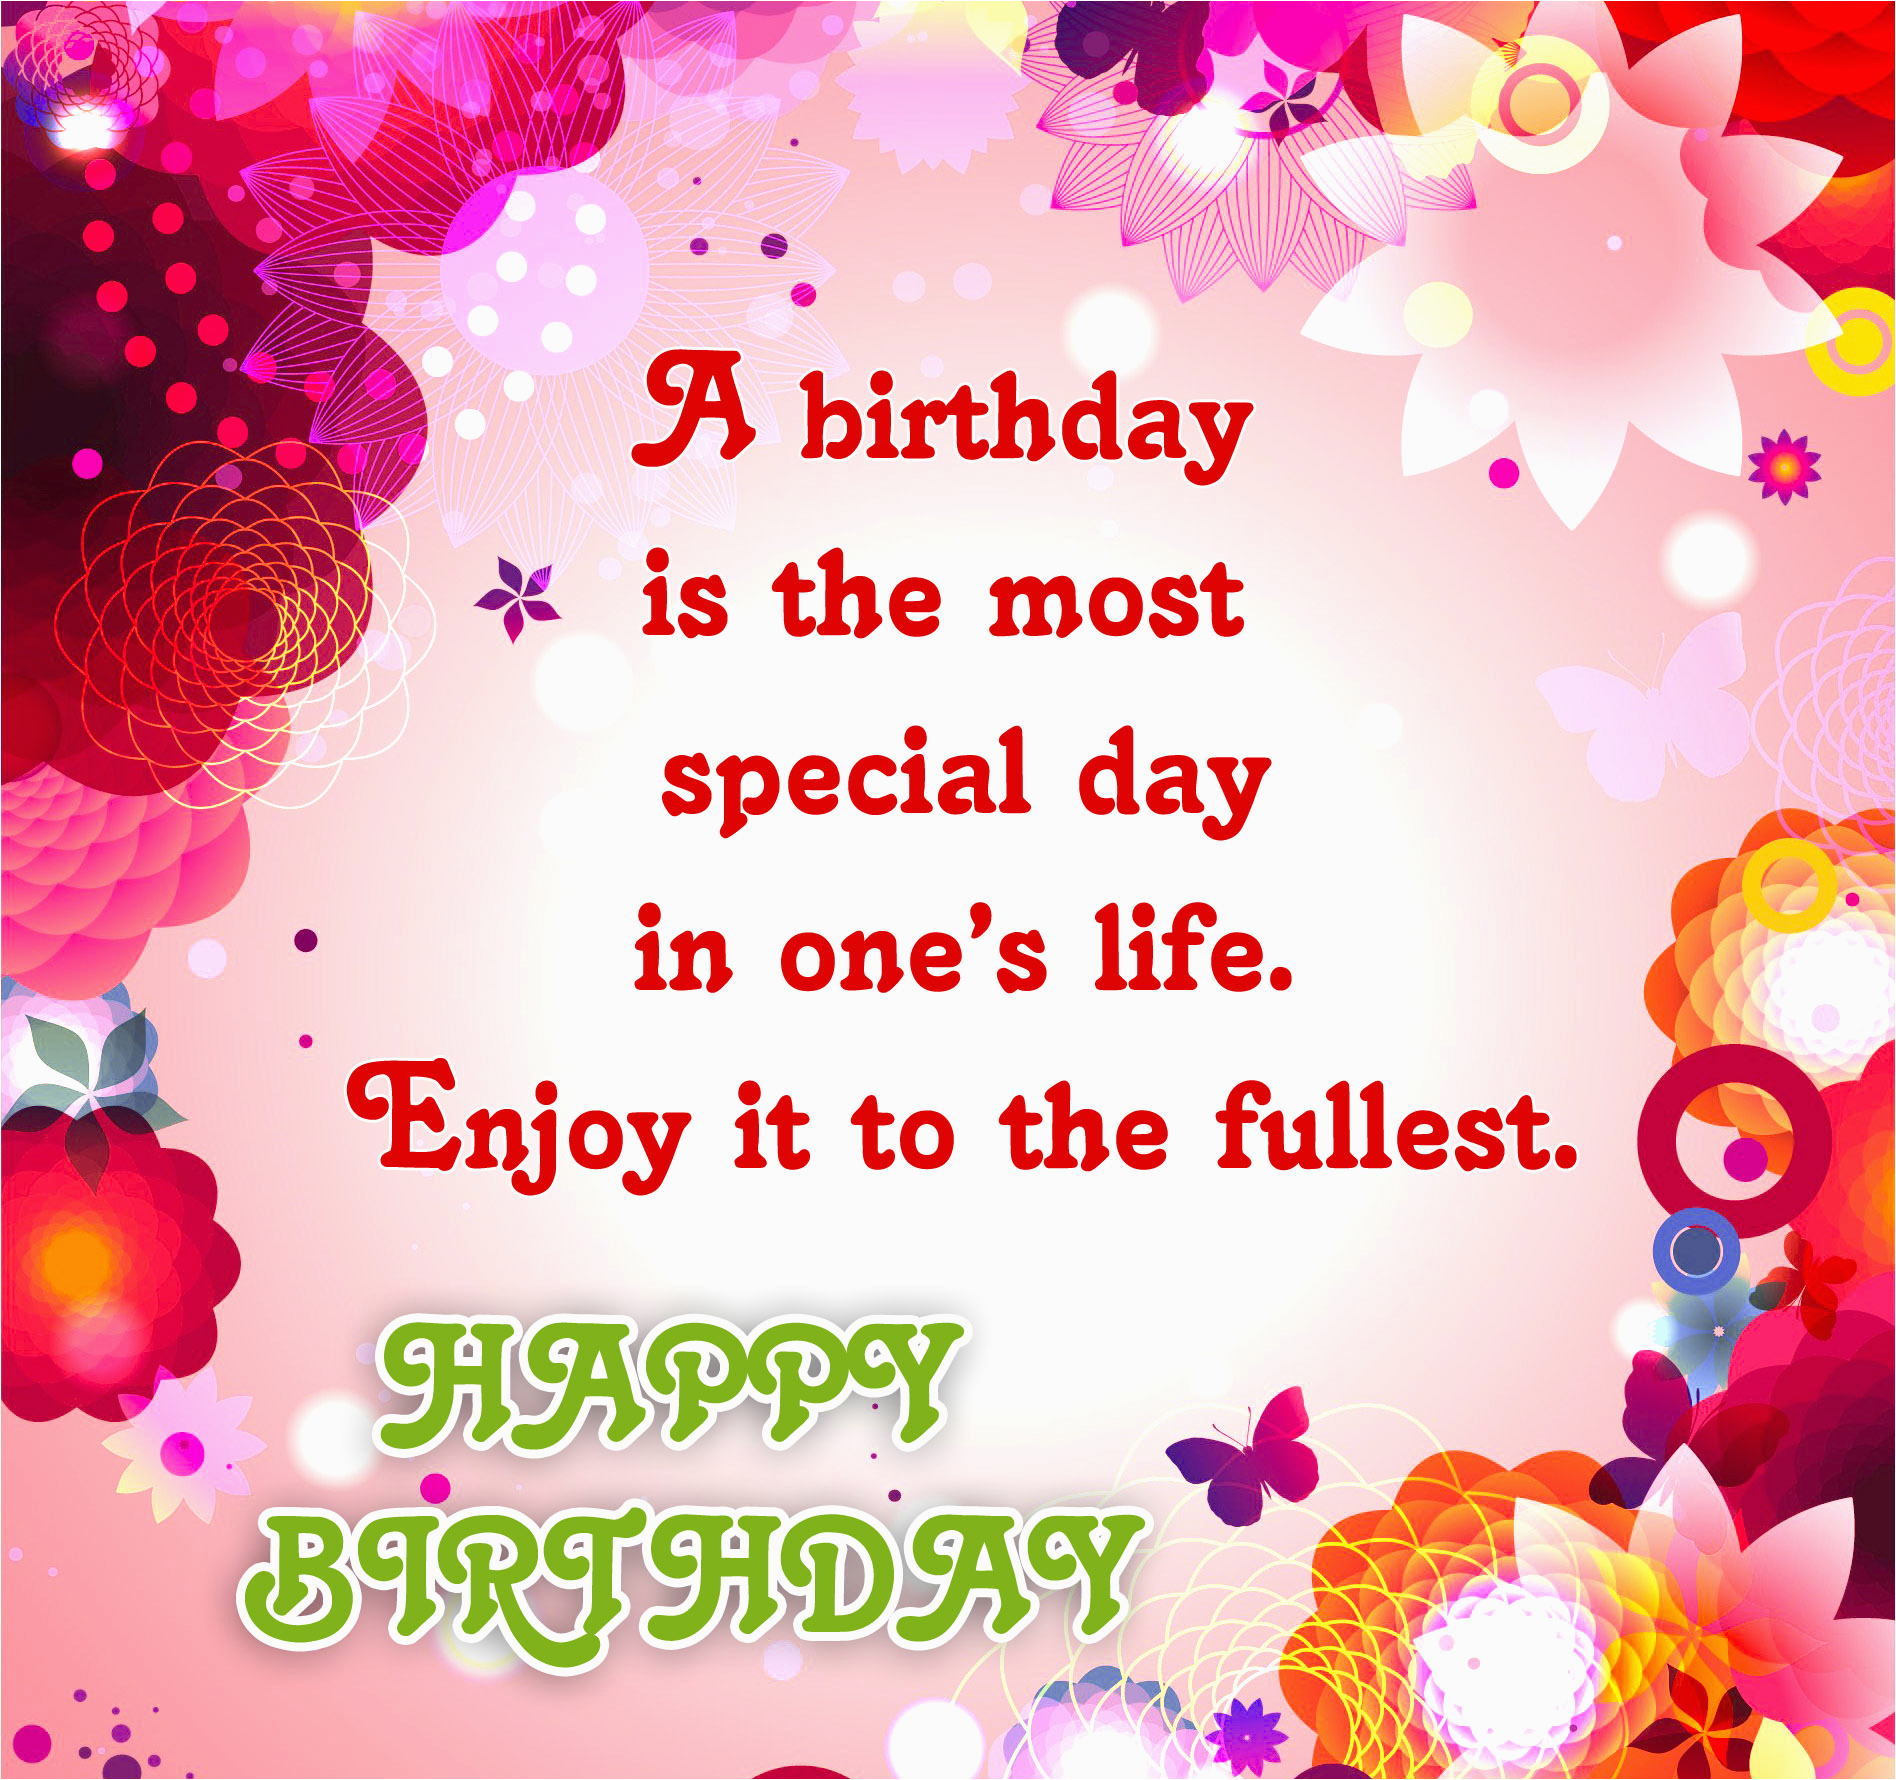 Www.birthday Cards Wishes Birthday Greeting Cards Pictures Animated Gifs